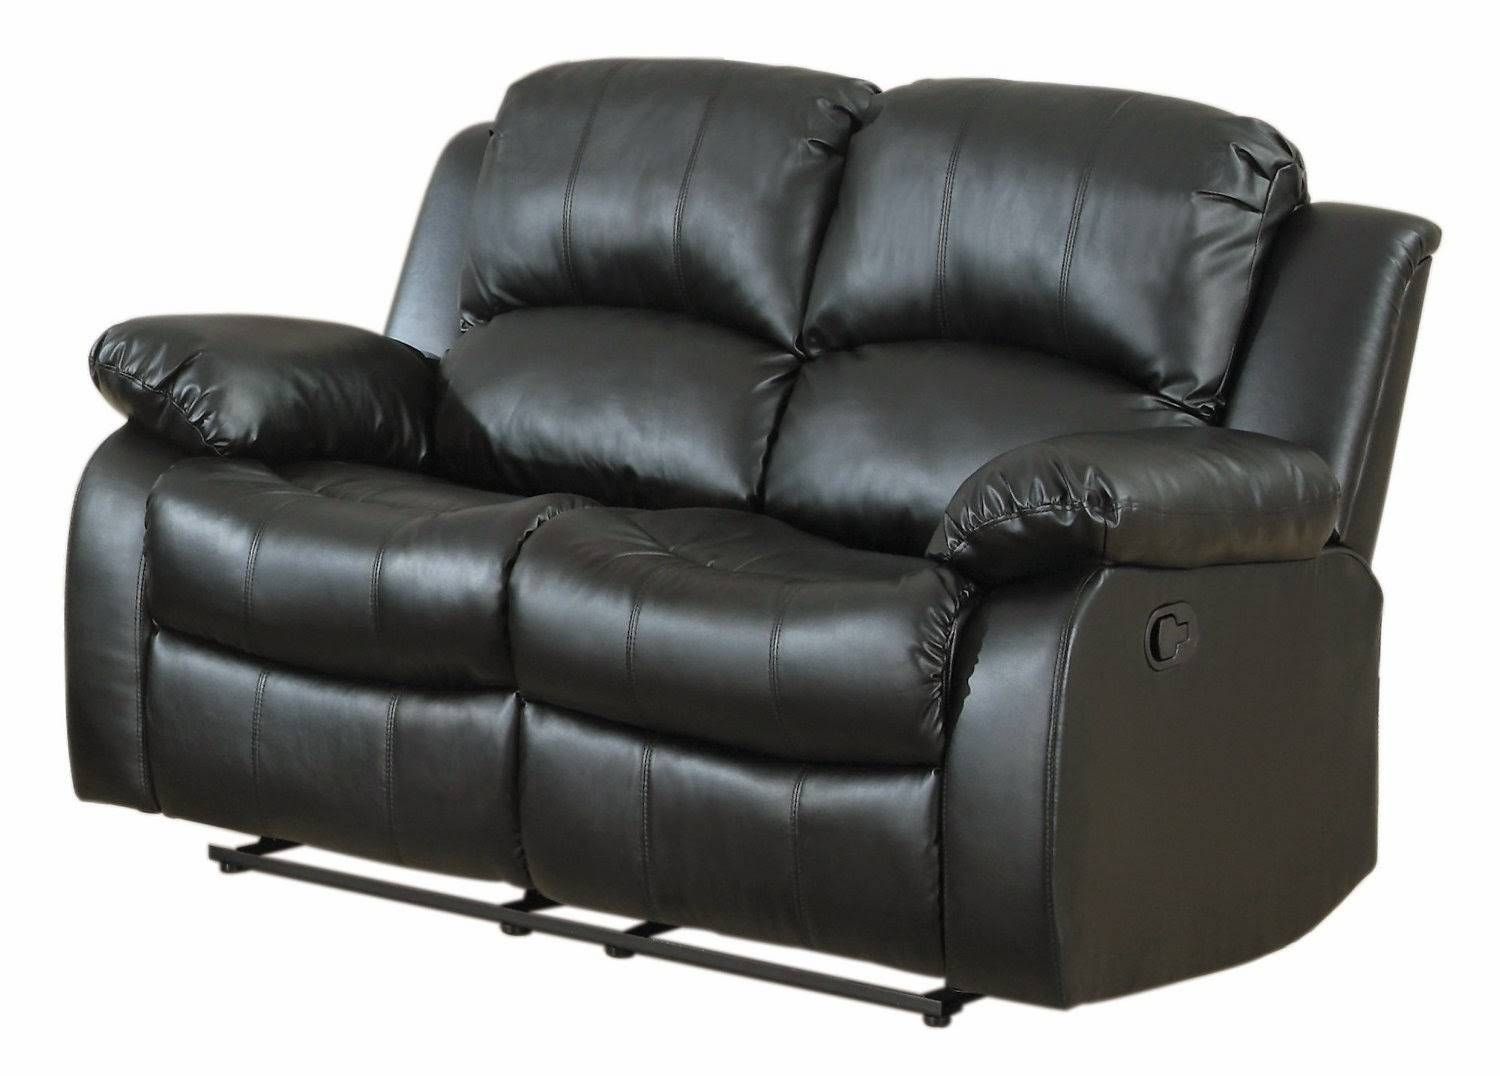 Reclining Sofas For Sale: Berkline Leather Reclining Sofa Costco Regarding Berkline Recliner Sofas (View 7 of 15)